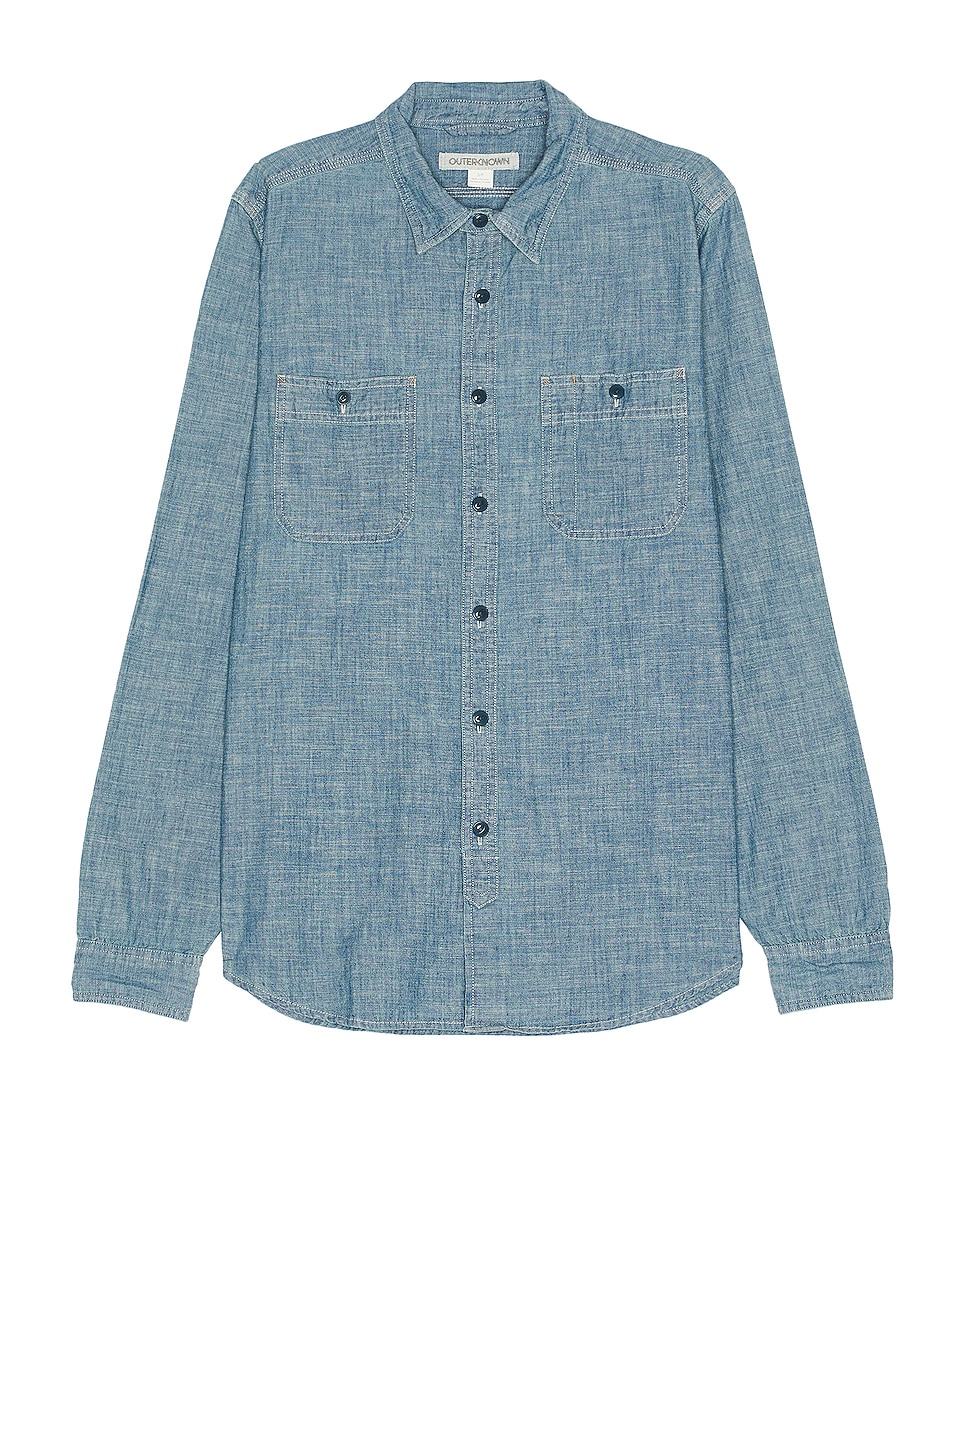 Рубашка OUTERKNOWN Chambray Utility, цвет Chambray рубашка outerknown blanket цвет juneau plaid